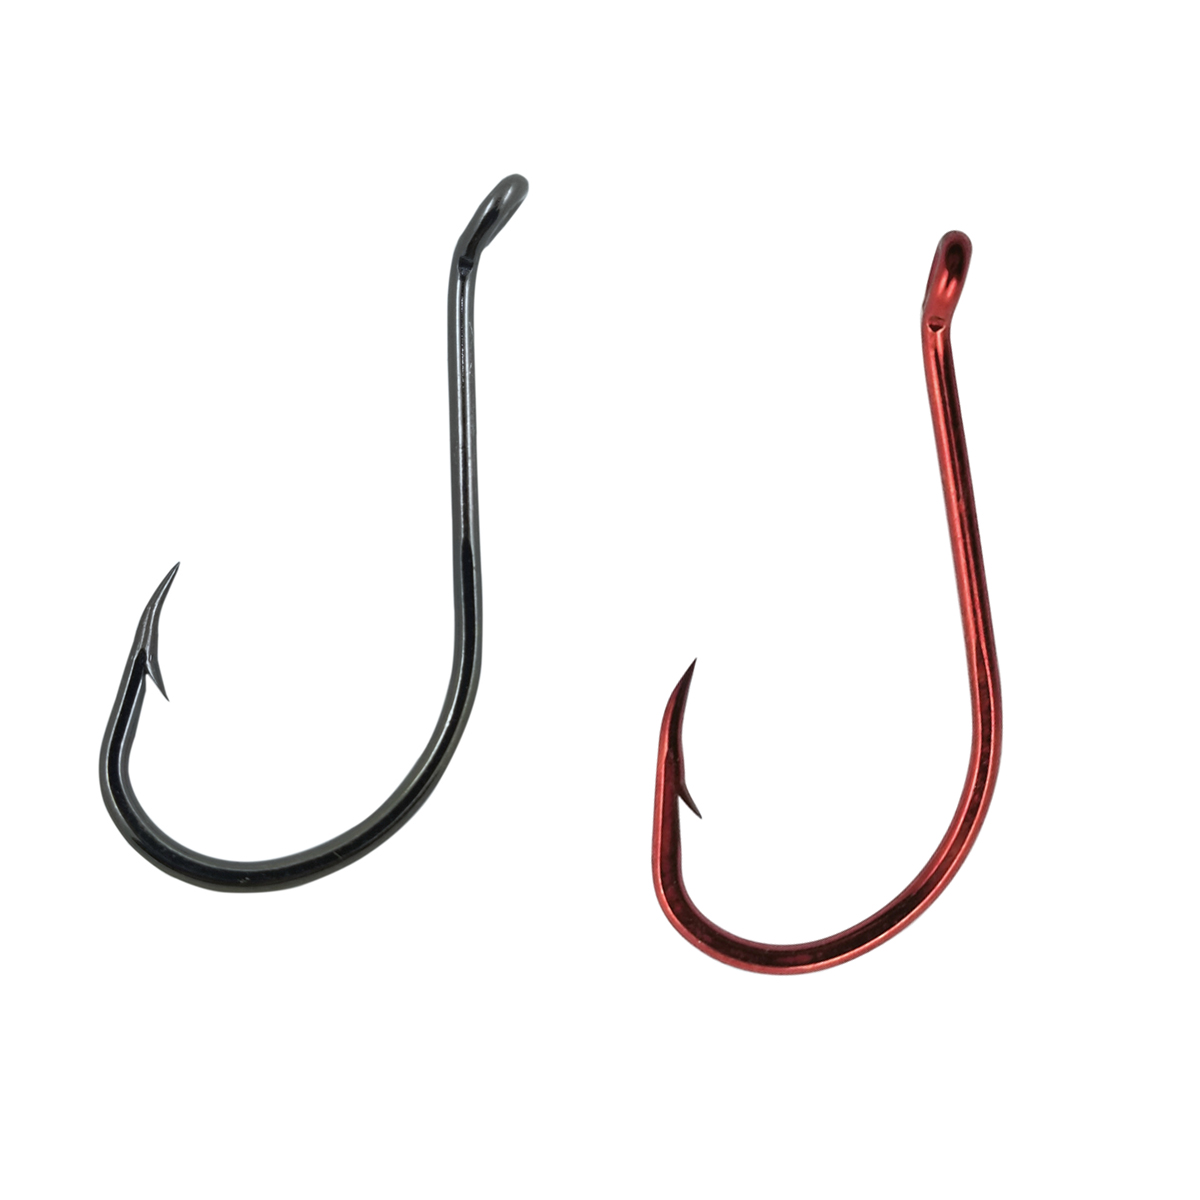 10/0 Japanese High Carbon Stainless Steel Chemically Sharpened Octopus  Circle Ocean Fishing Hooks 7385 Ocean Fish Hooks From Jace888, $12.57, 10/0 circle  hooks 